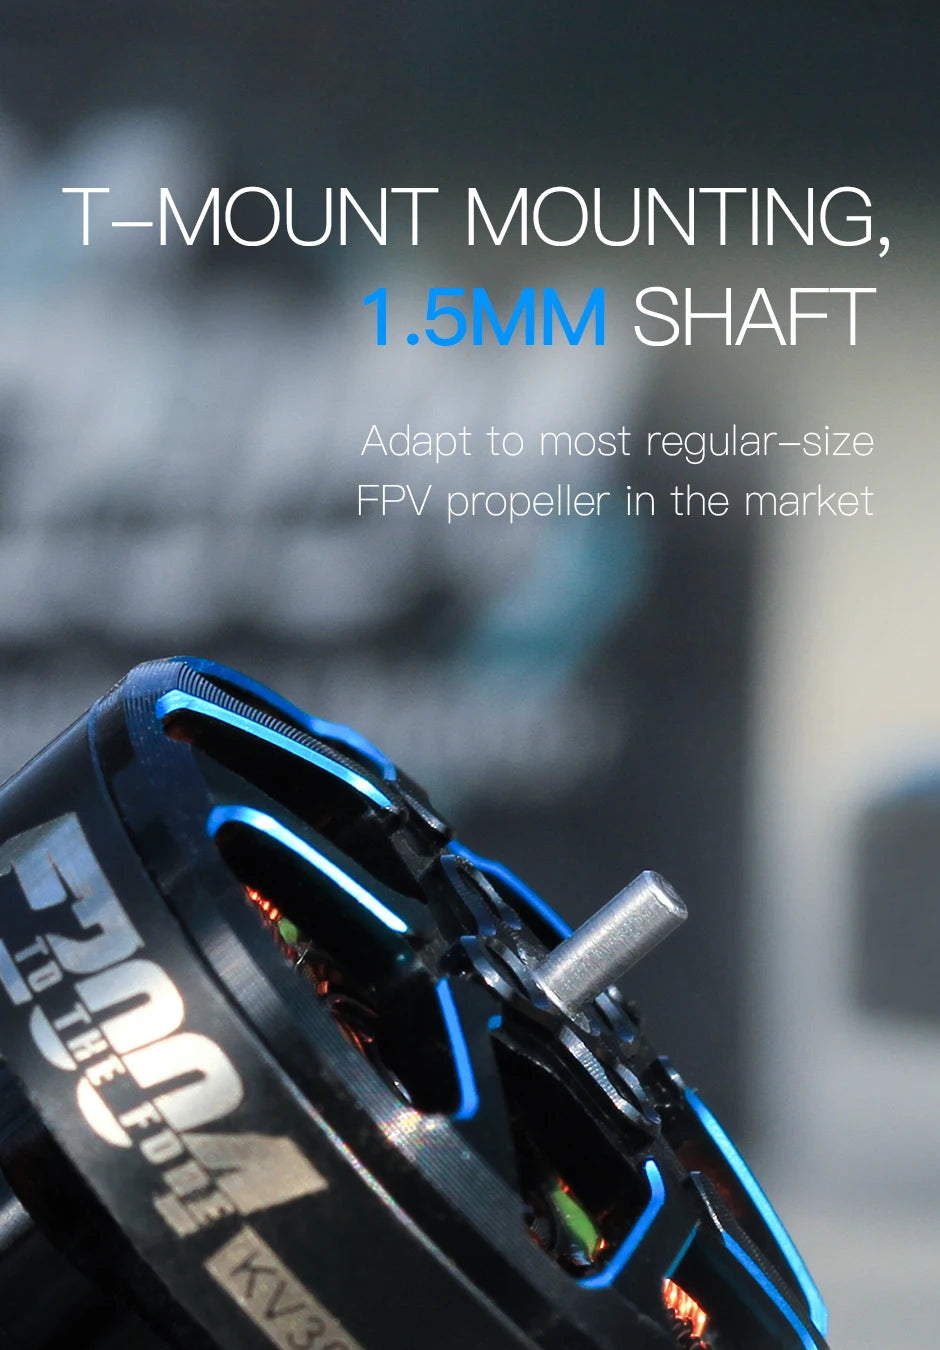 T-motor, T-MOUNT MOUNTING; T.SMM SHAFT Adapt to most